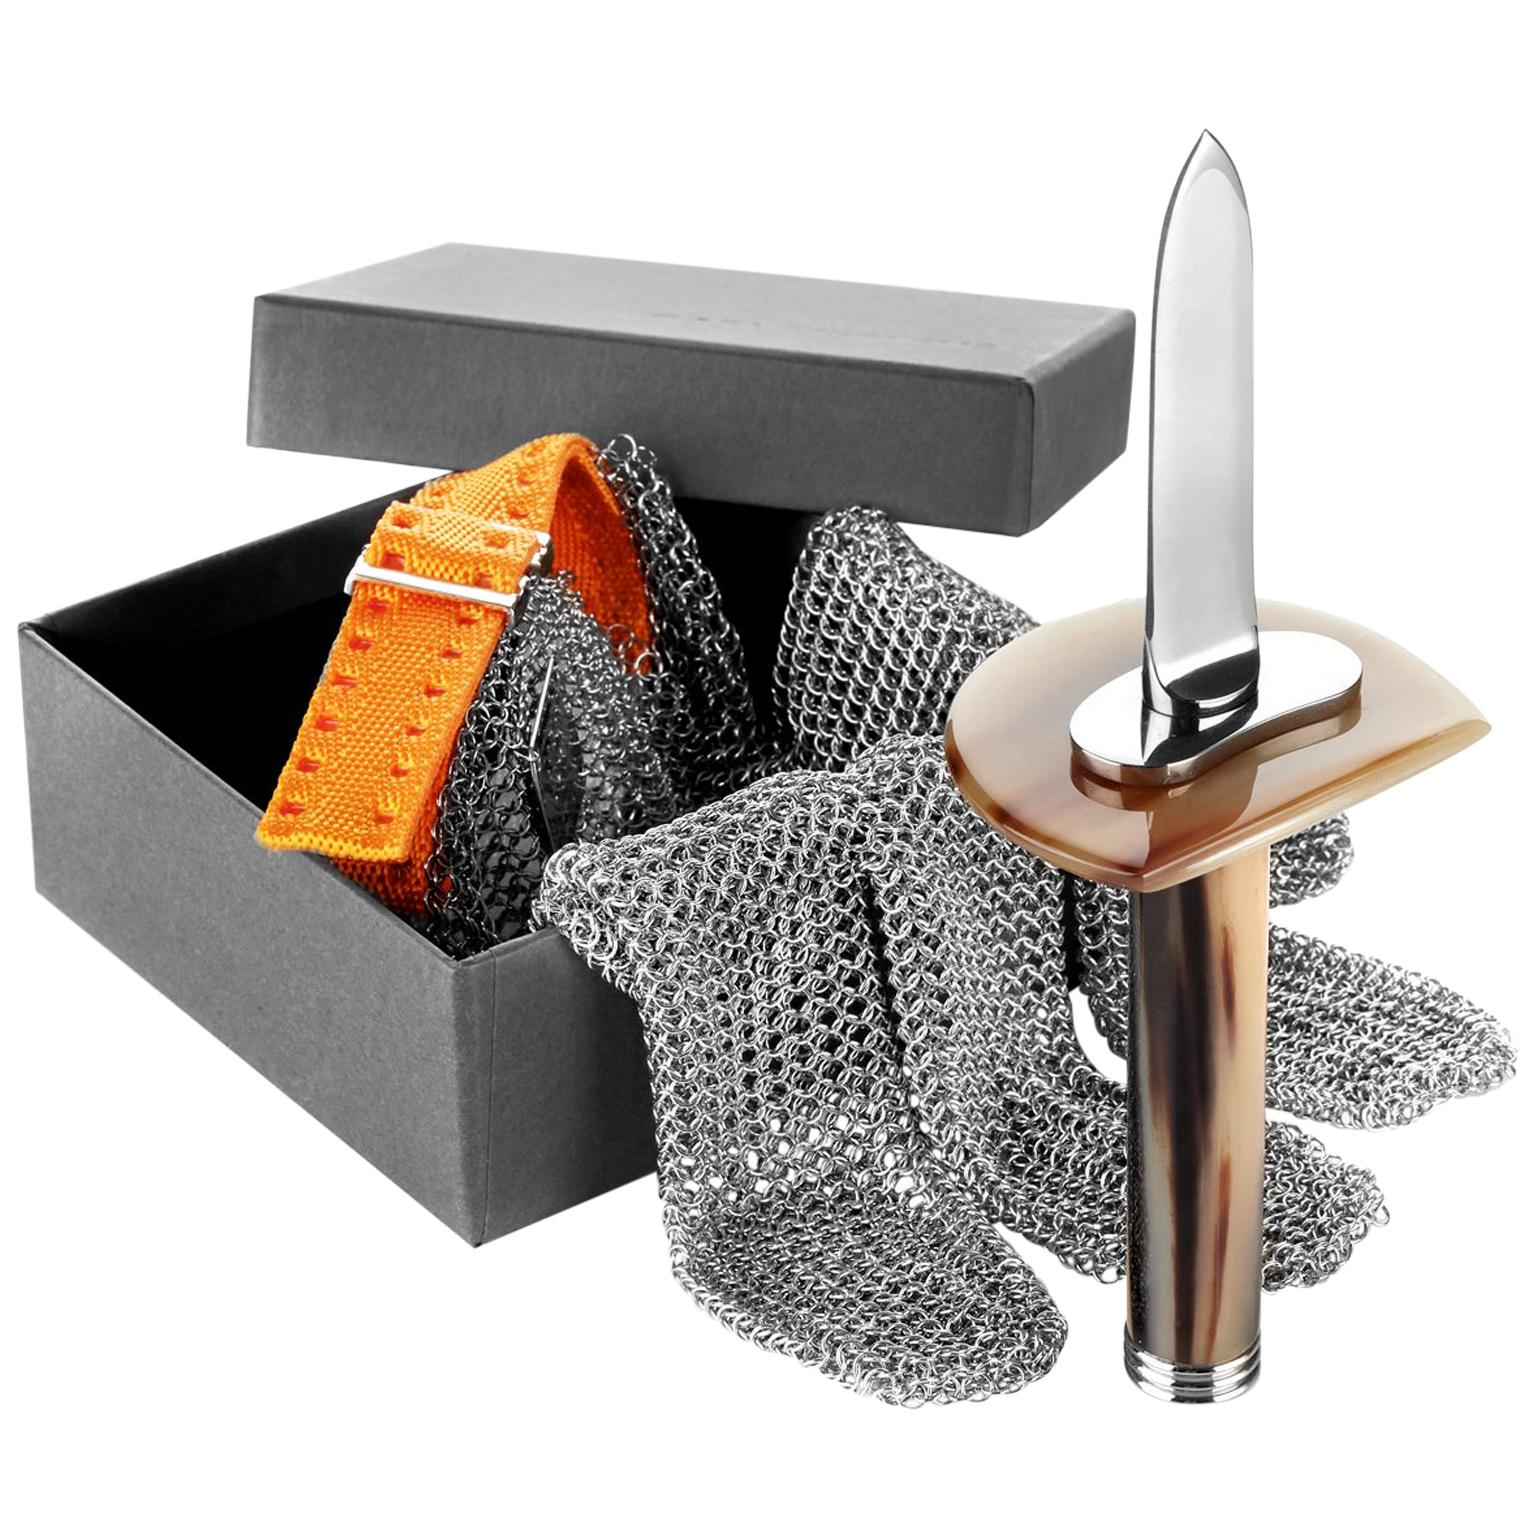 Oyster Shucking Set in Corno Italiano and Stainless Steeel, Mod. 511